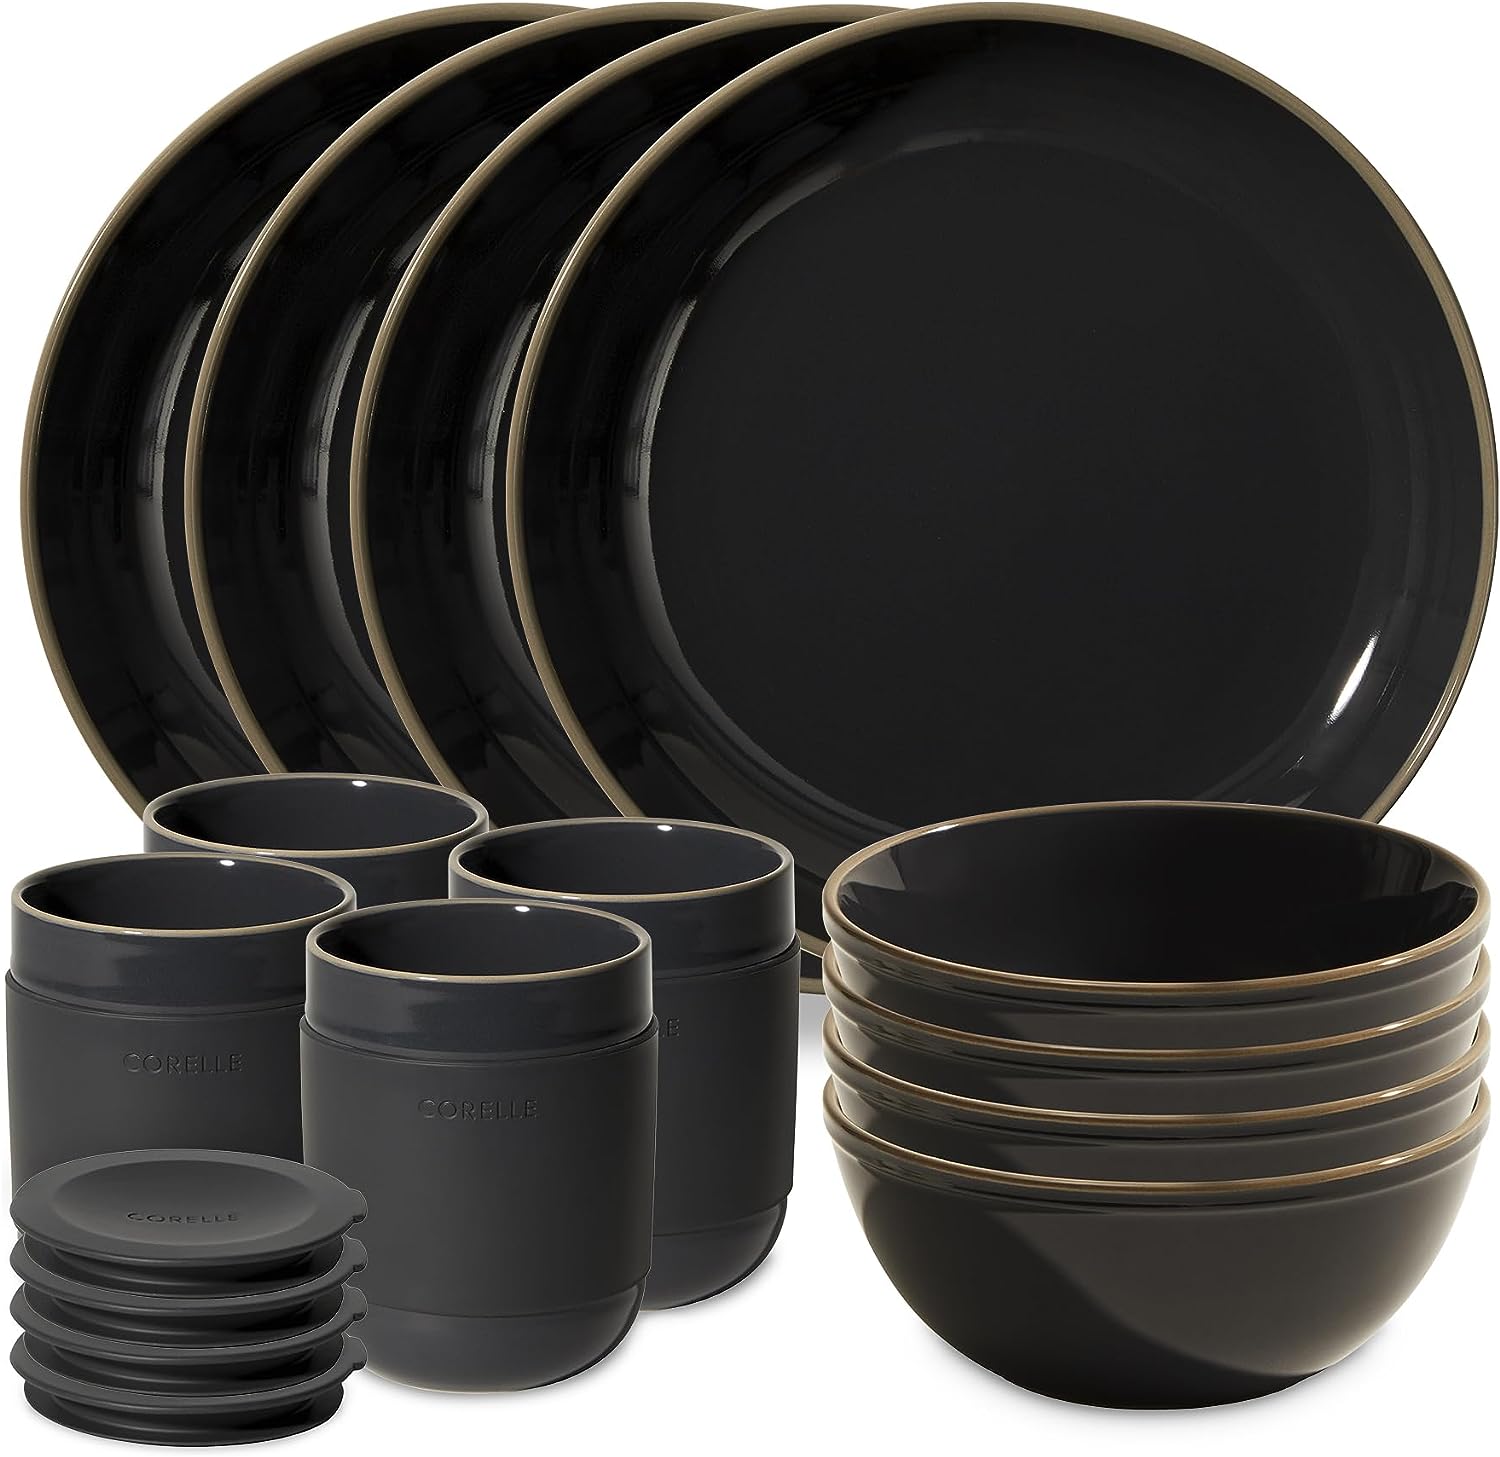 https://bigbigmart.com/wp-content/uploads/2023/09/Corelle-Stoneware-Dinnerware-Set-Handmade-Reactive-Solid-Glazed-Ceramic-Plates-and-Bowls-Modern-Rustic-Style-Round-Dishes-Service-for-4-Peppercorn-12-PIECE-SET.jpg